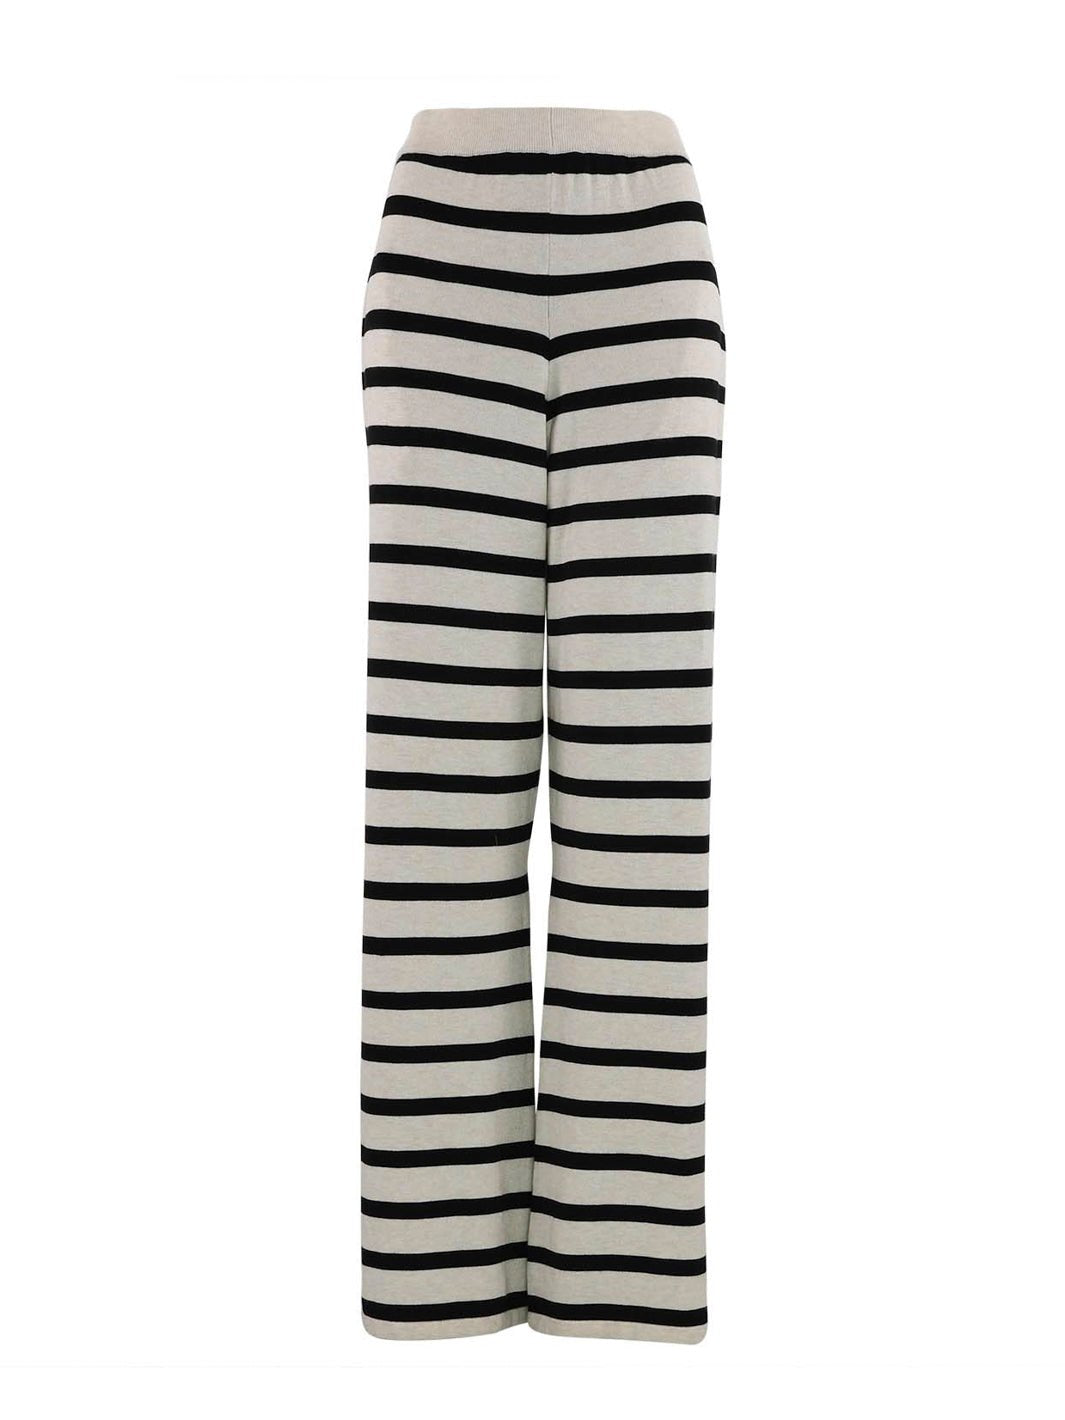 Continue Rita knit pants sand with black stripe - Online-Mode